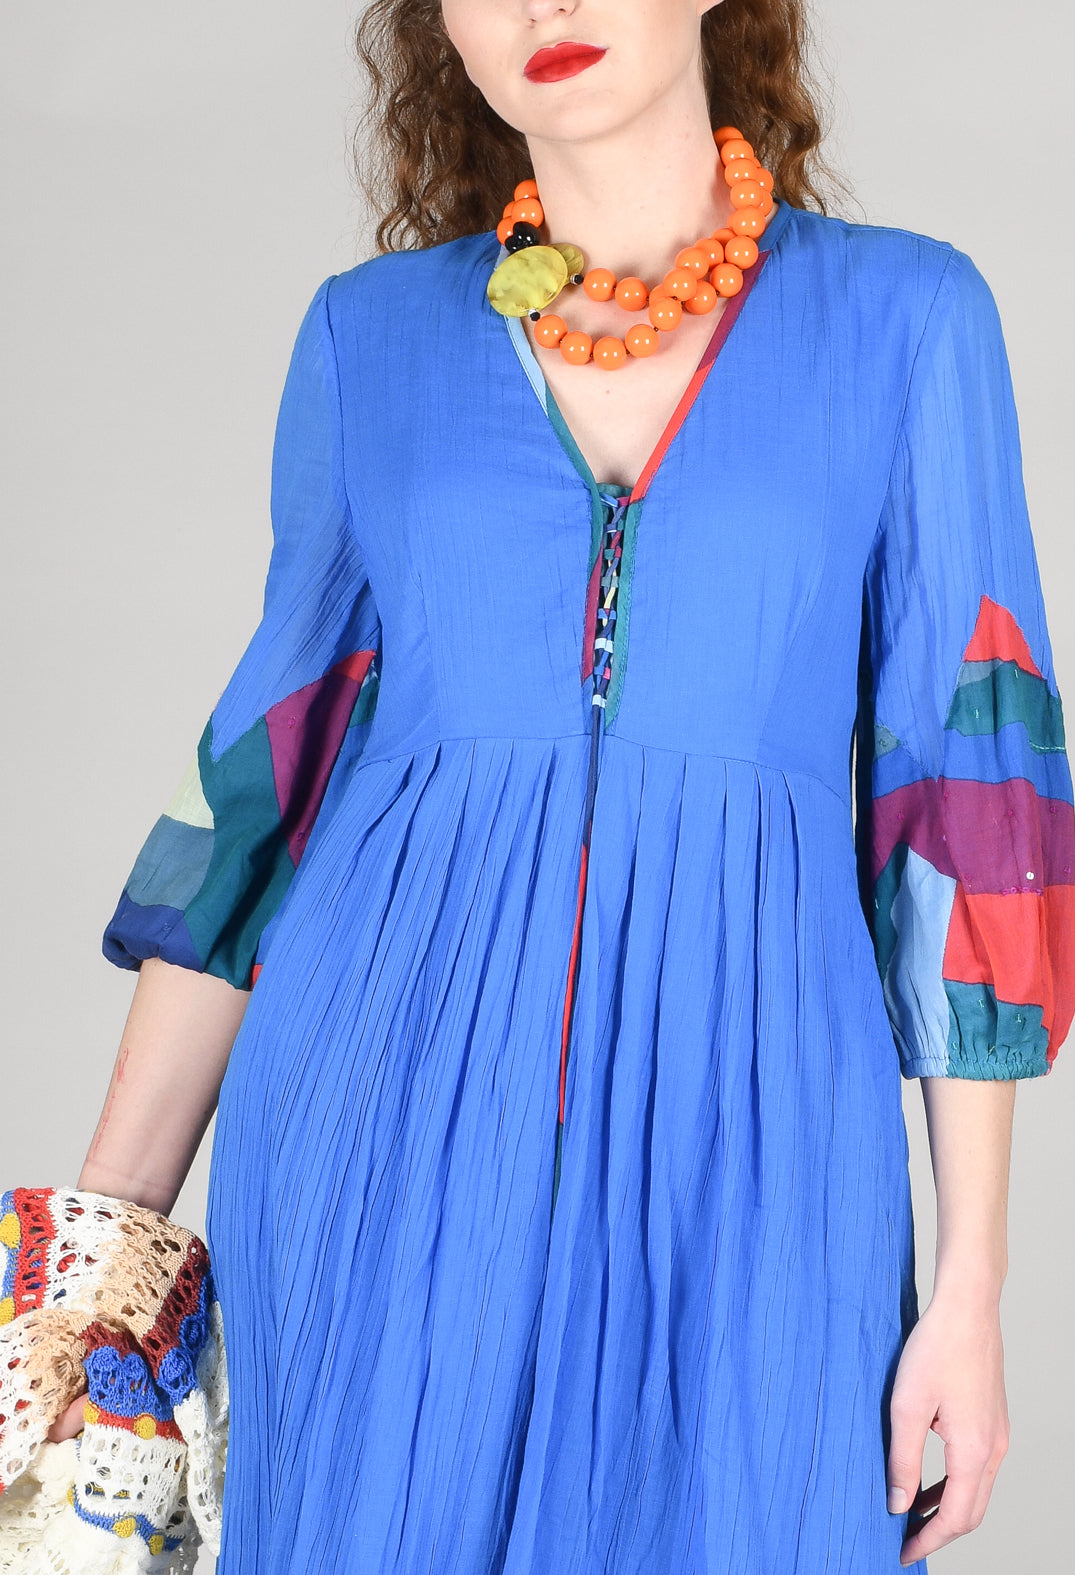 Theatral Dress in Bleu and Petr